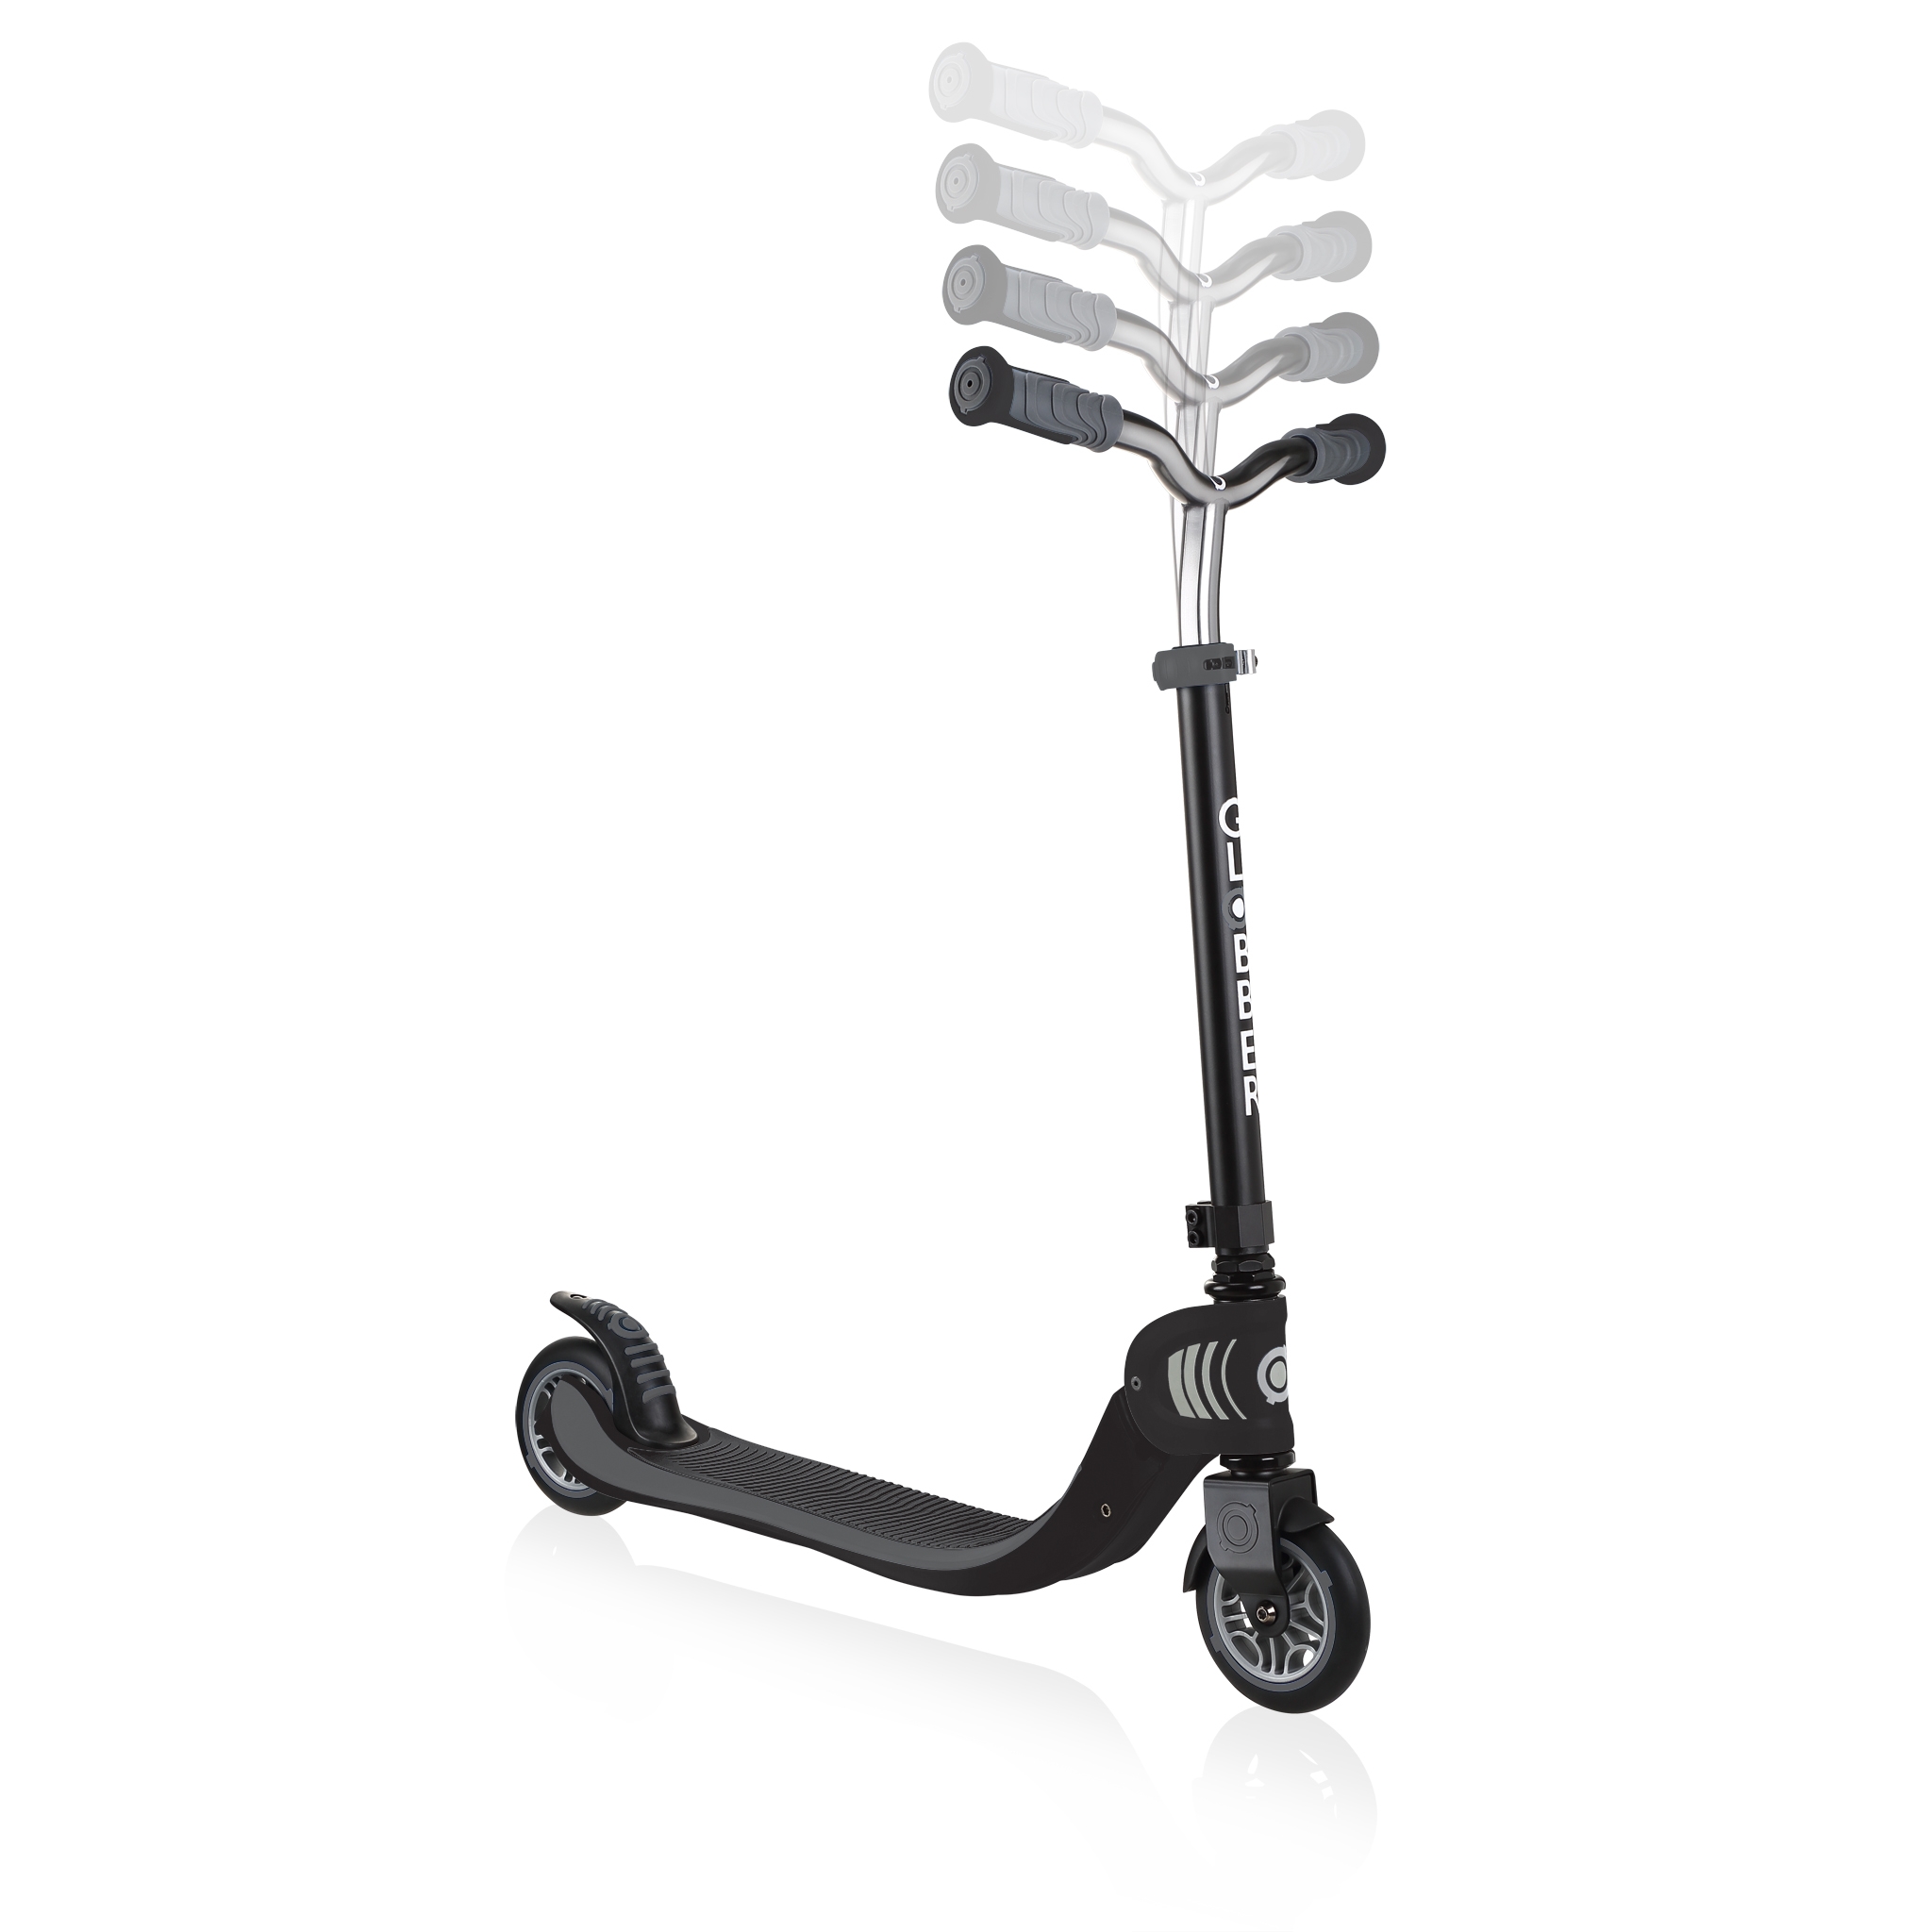 FLOW-FOLDABLE-125-2-wheel-scooter-for-kids-with-adjustable-t-bar-black 2